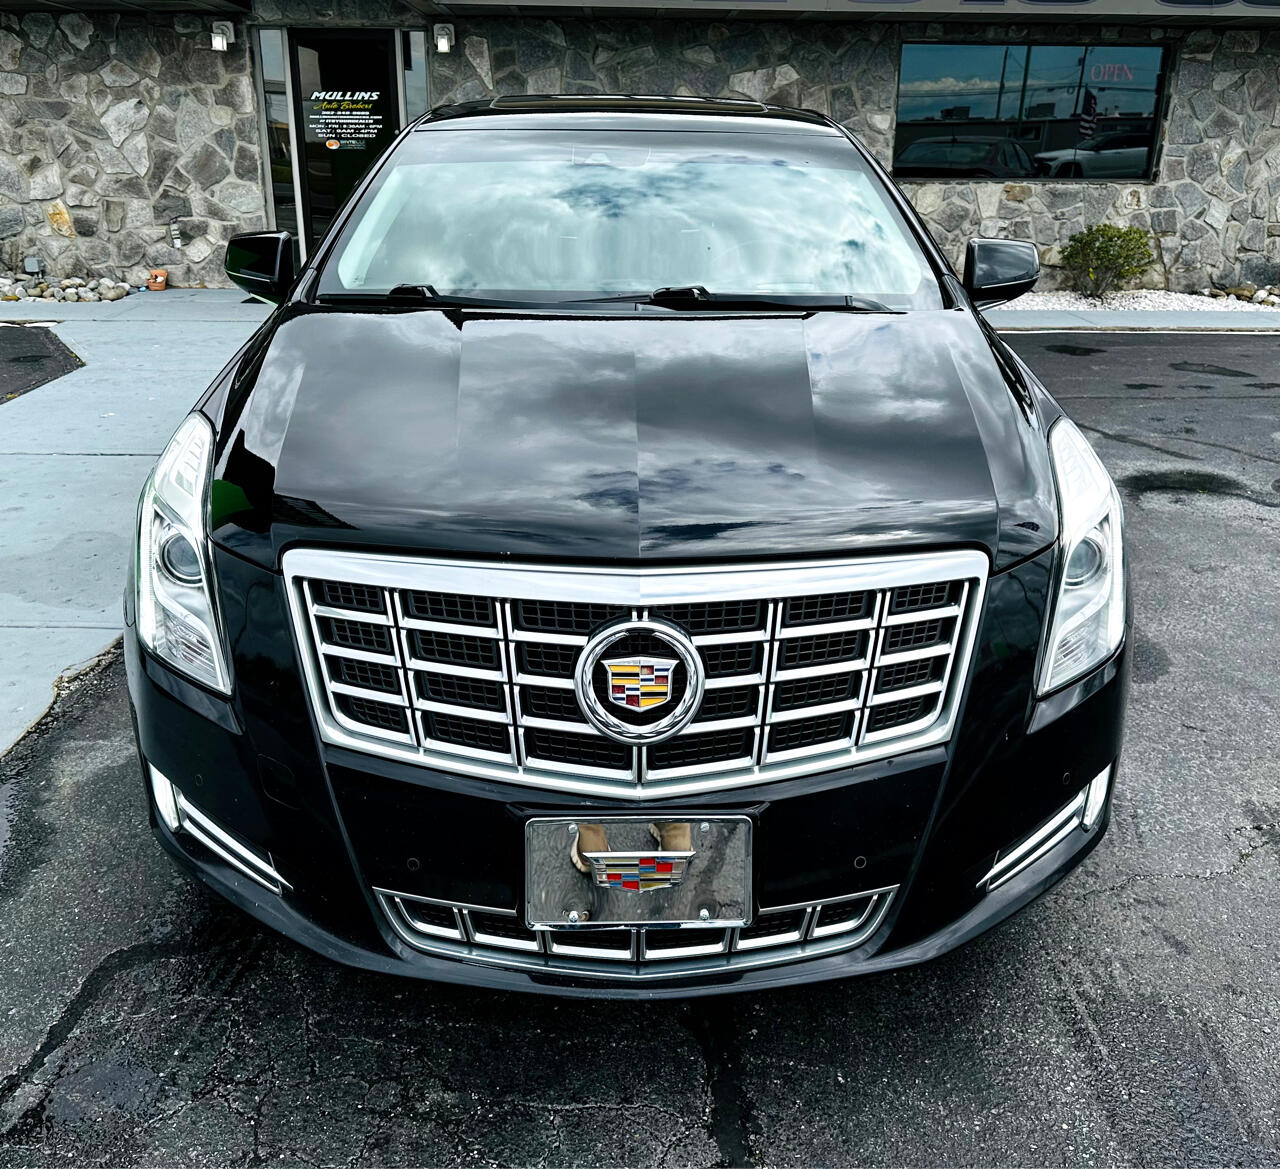 Used 2013 Cadillac XTS Premium Collection with VIN 2G61S5S37D9243516 for sale in Bridgeville, DE